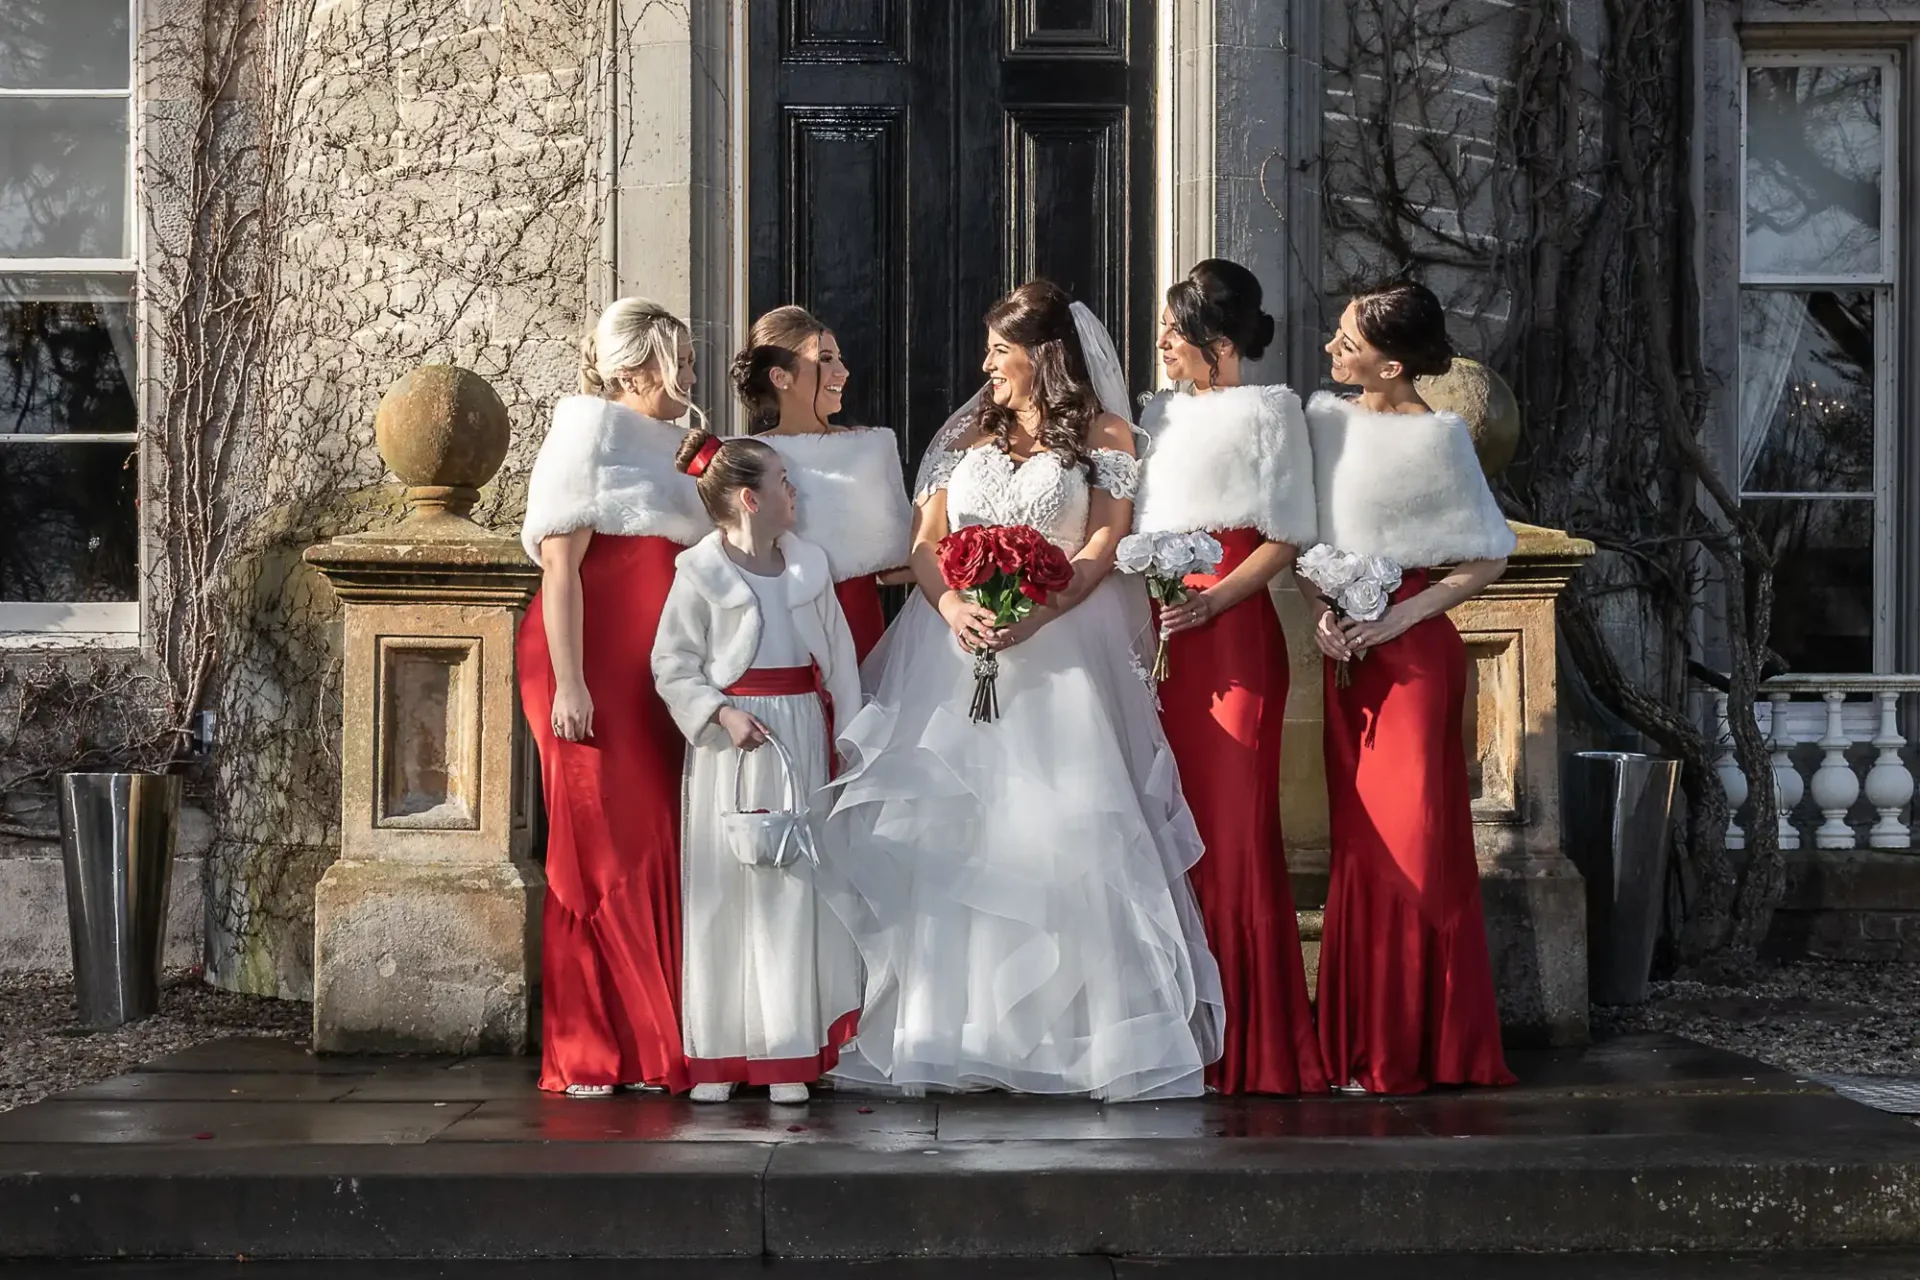 Bride in a white gown surrounded by bridesmaids in red dresses and white shawls, standing in front of a stone building.